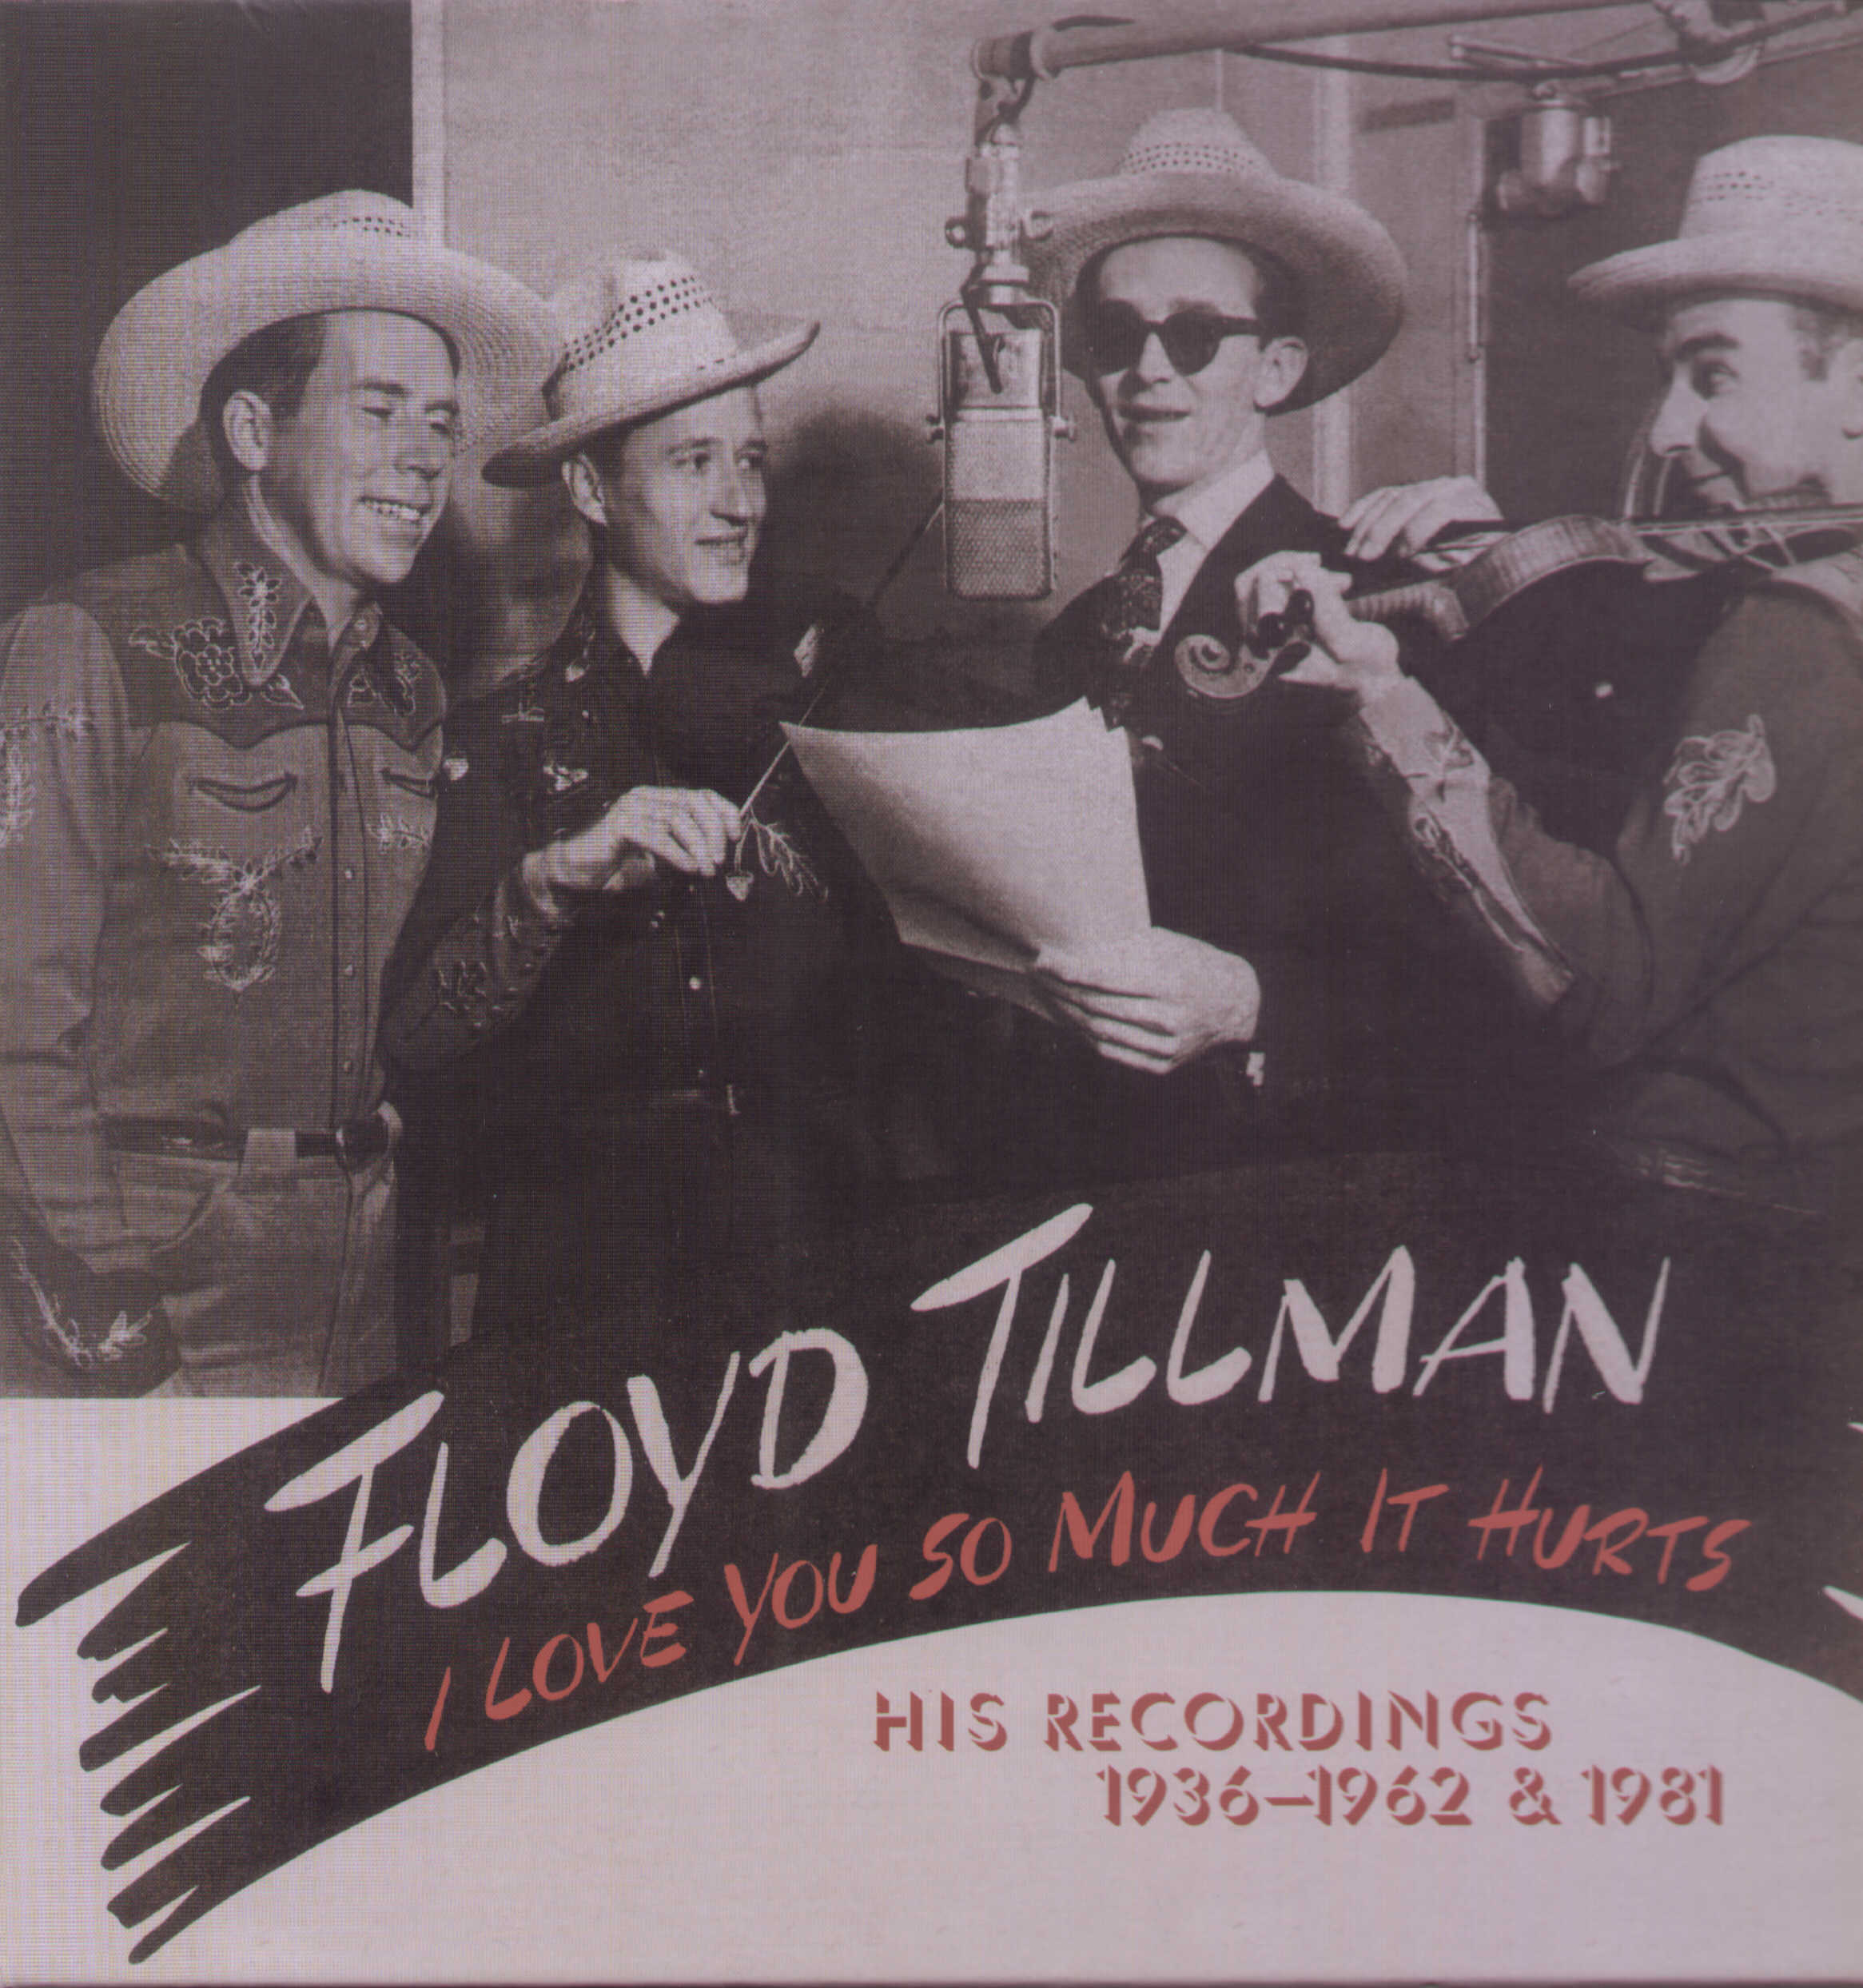 I LOVE YOU SO MUCH IT HURTS-HIS RECORDINGS 1936-62